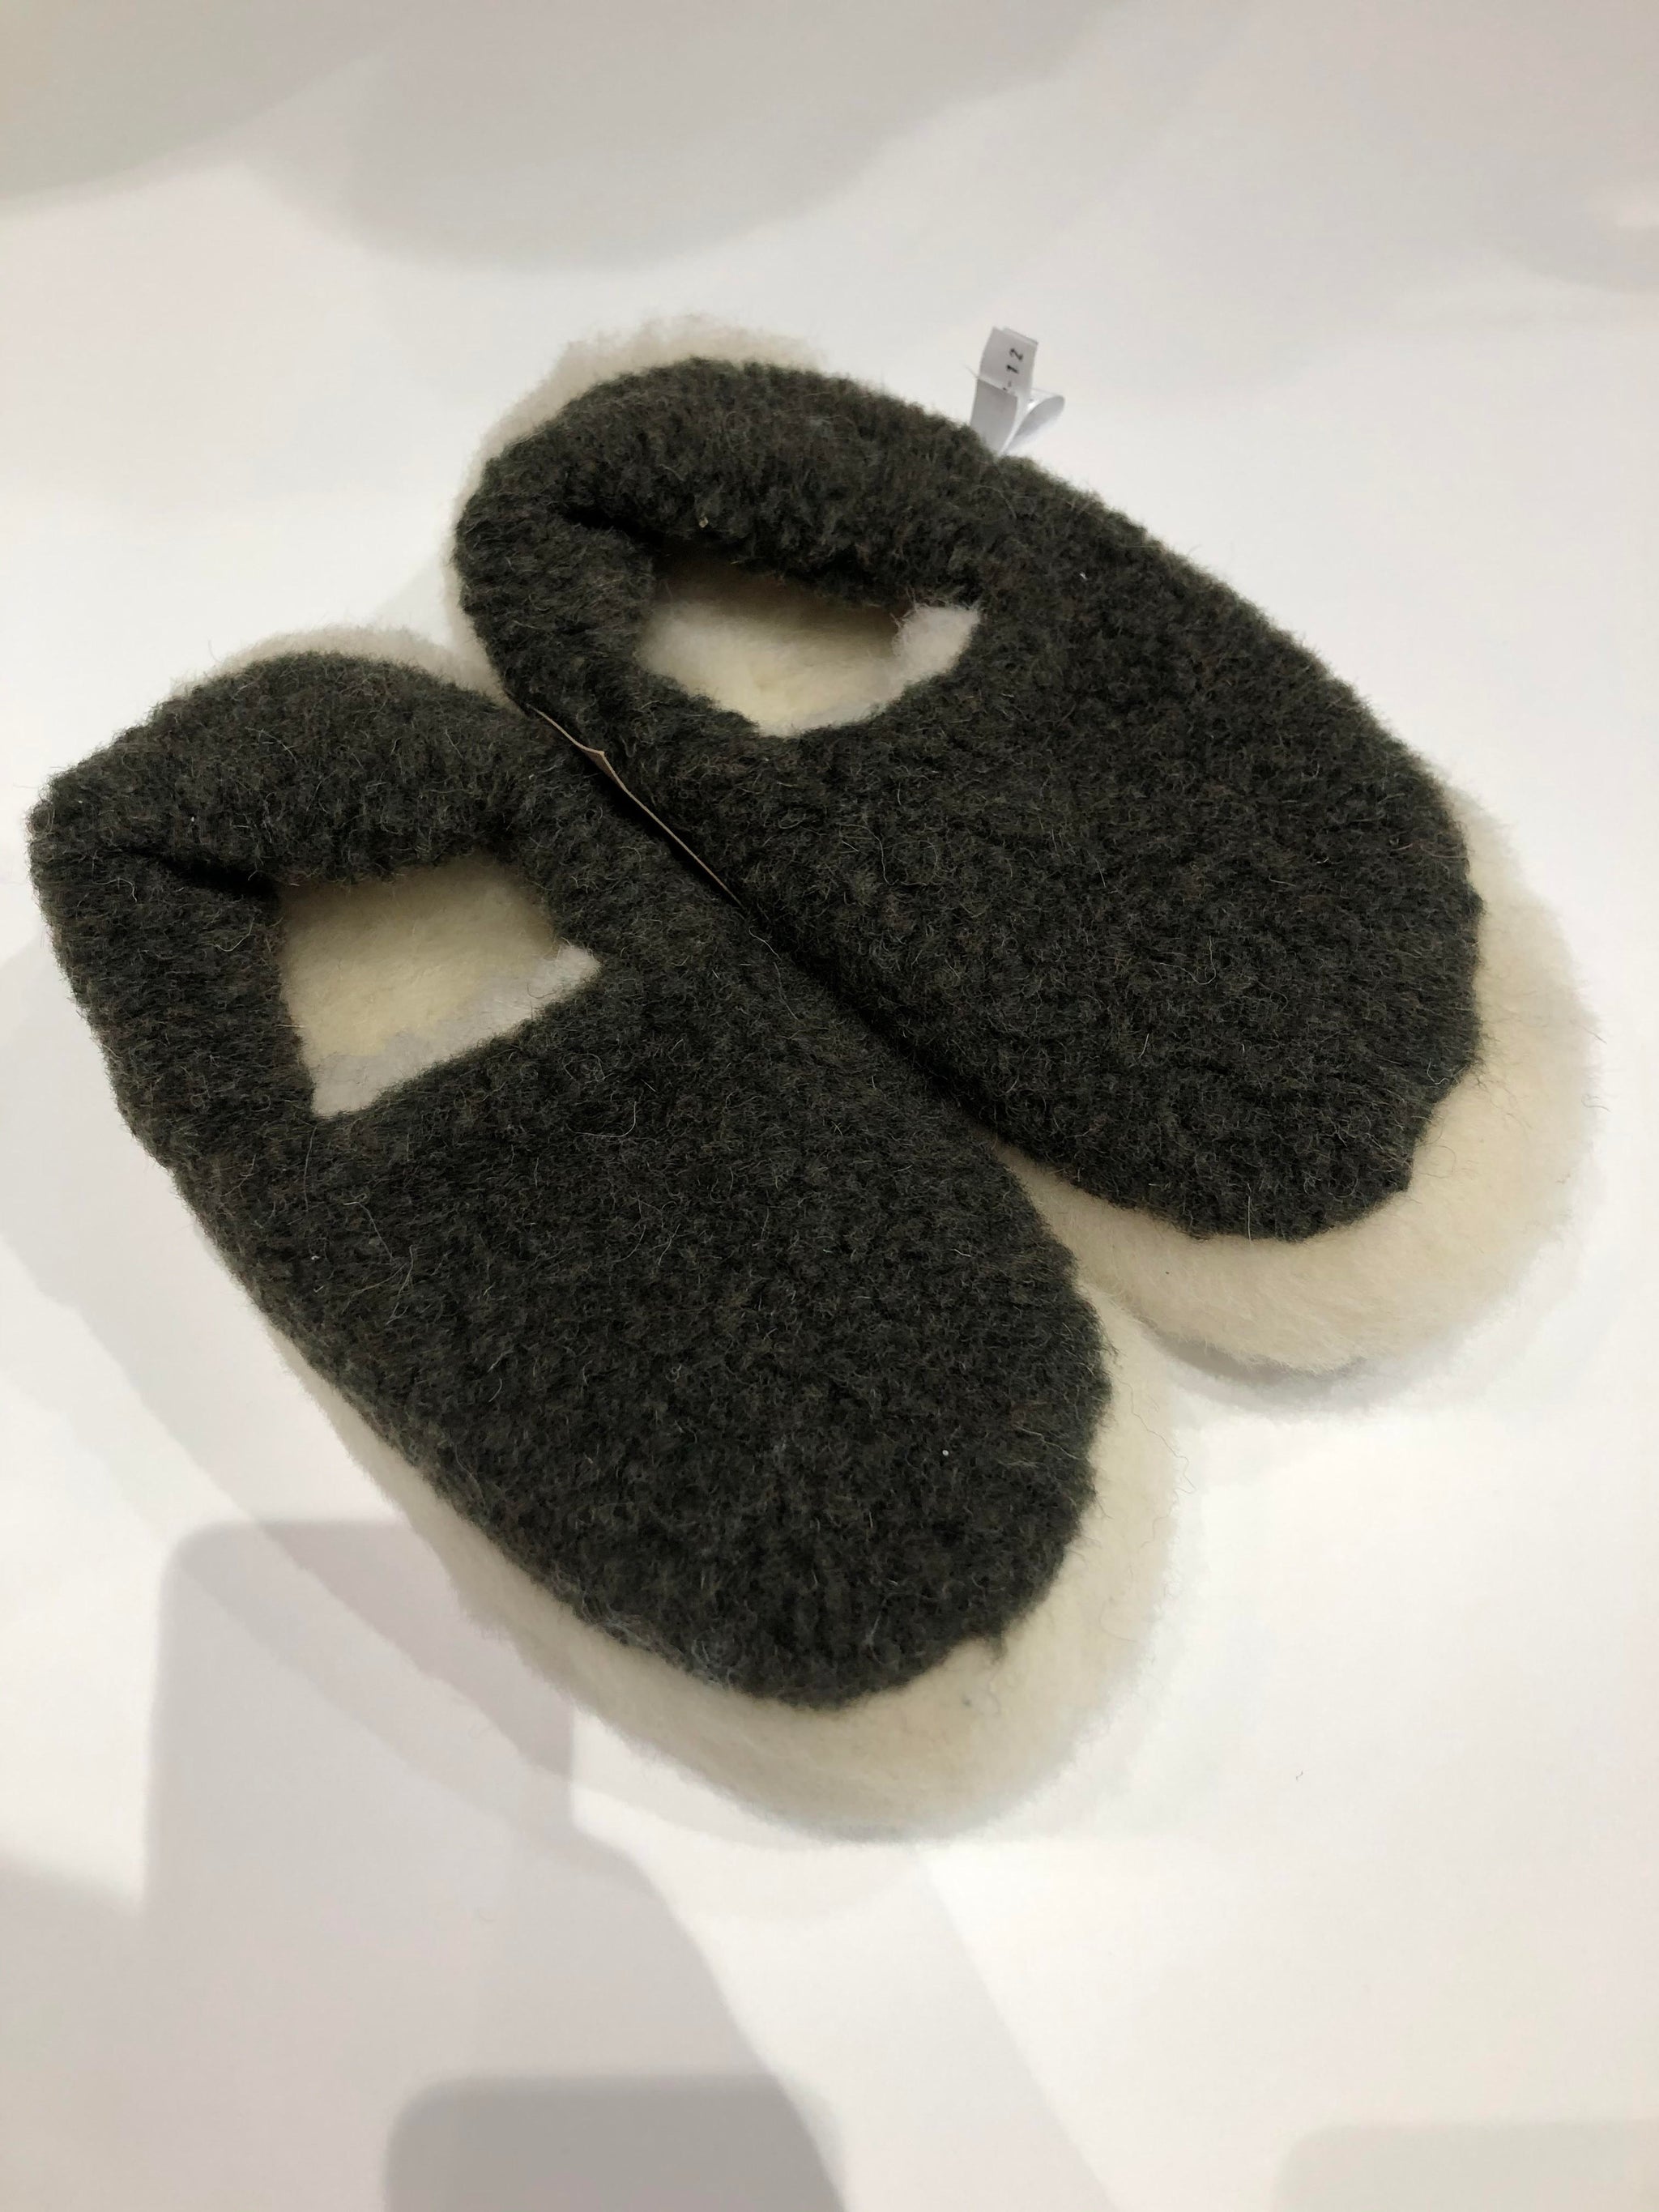 Merino wool slippers - The Donegal Shop